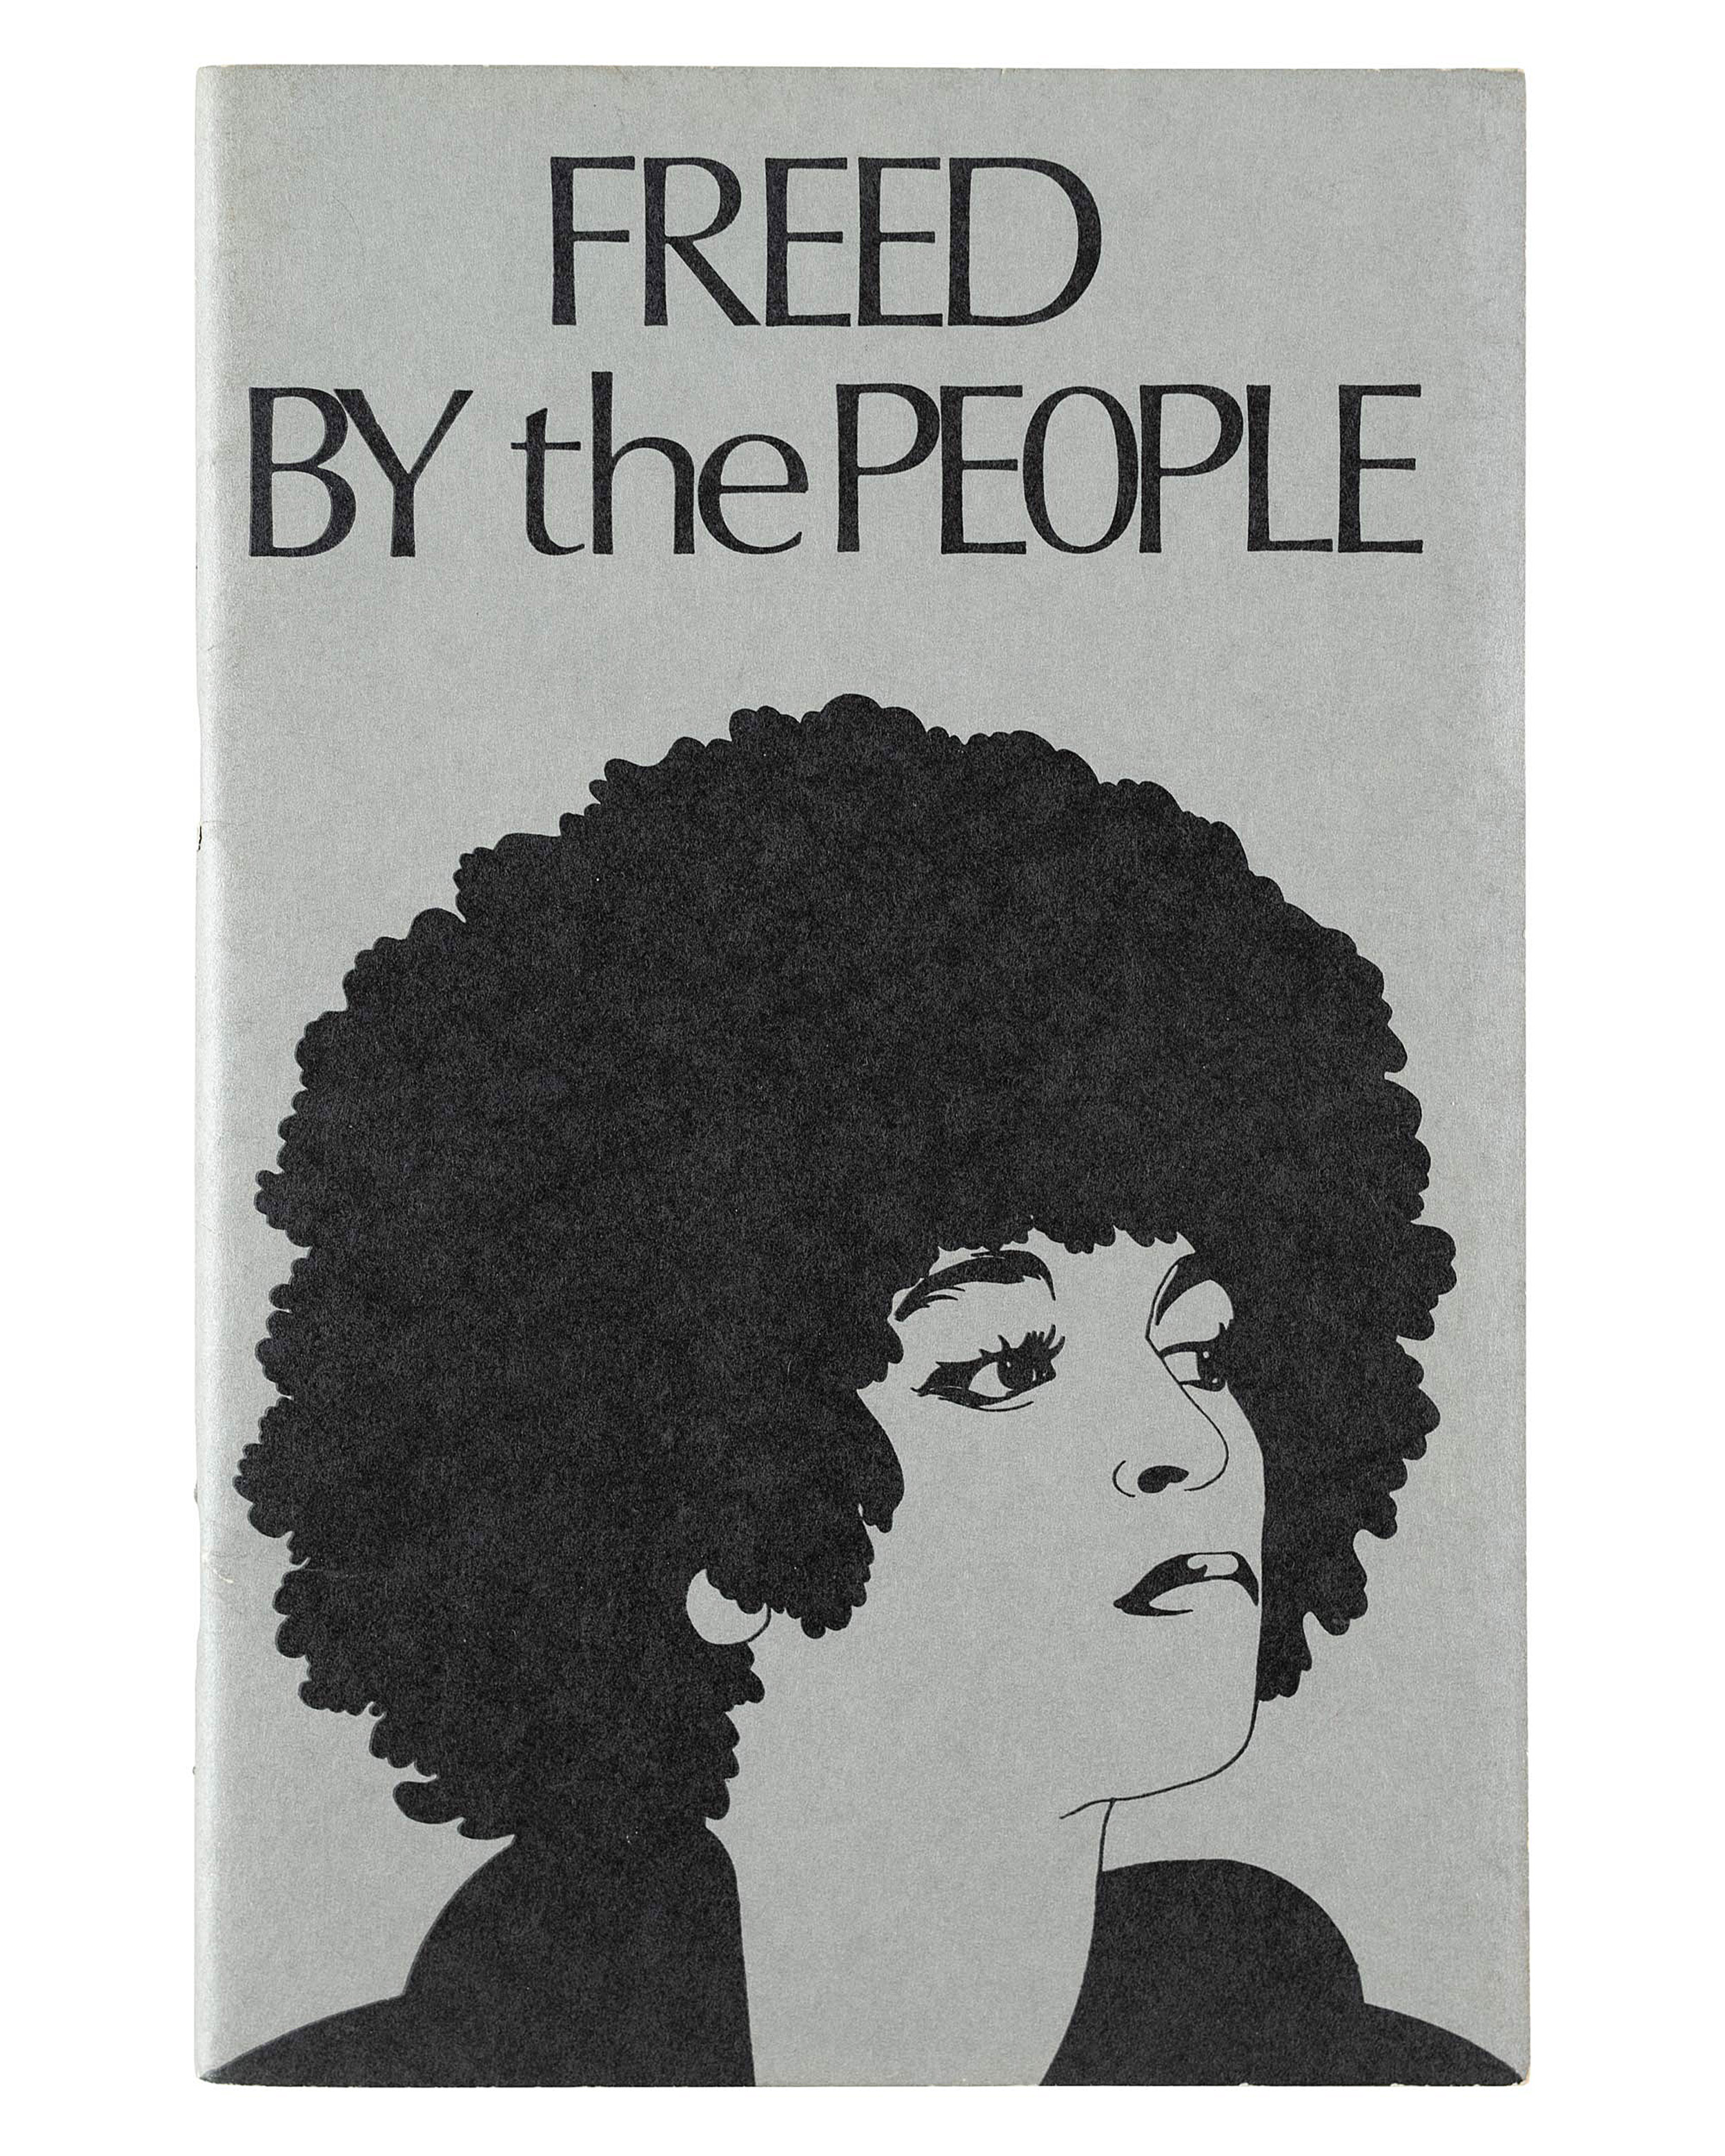 A gray pamphlet with an illustration of Angela Davis and "Freed by the People" in black text.